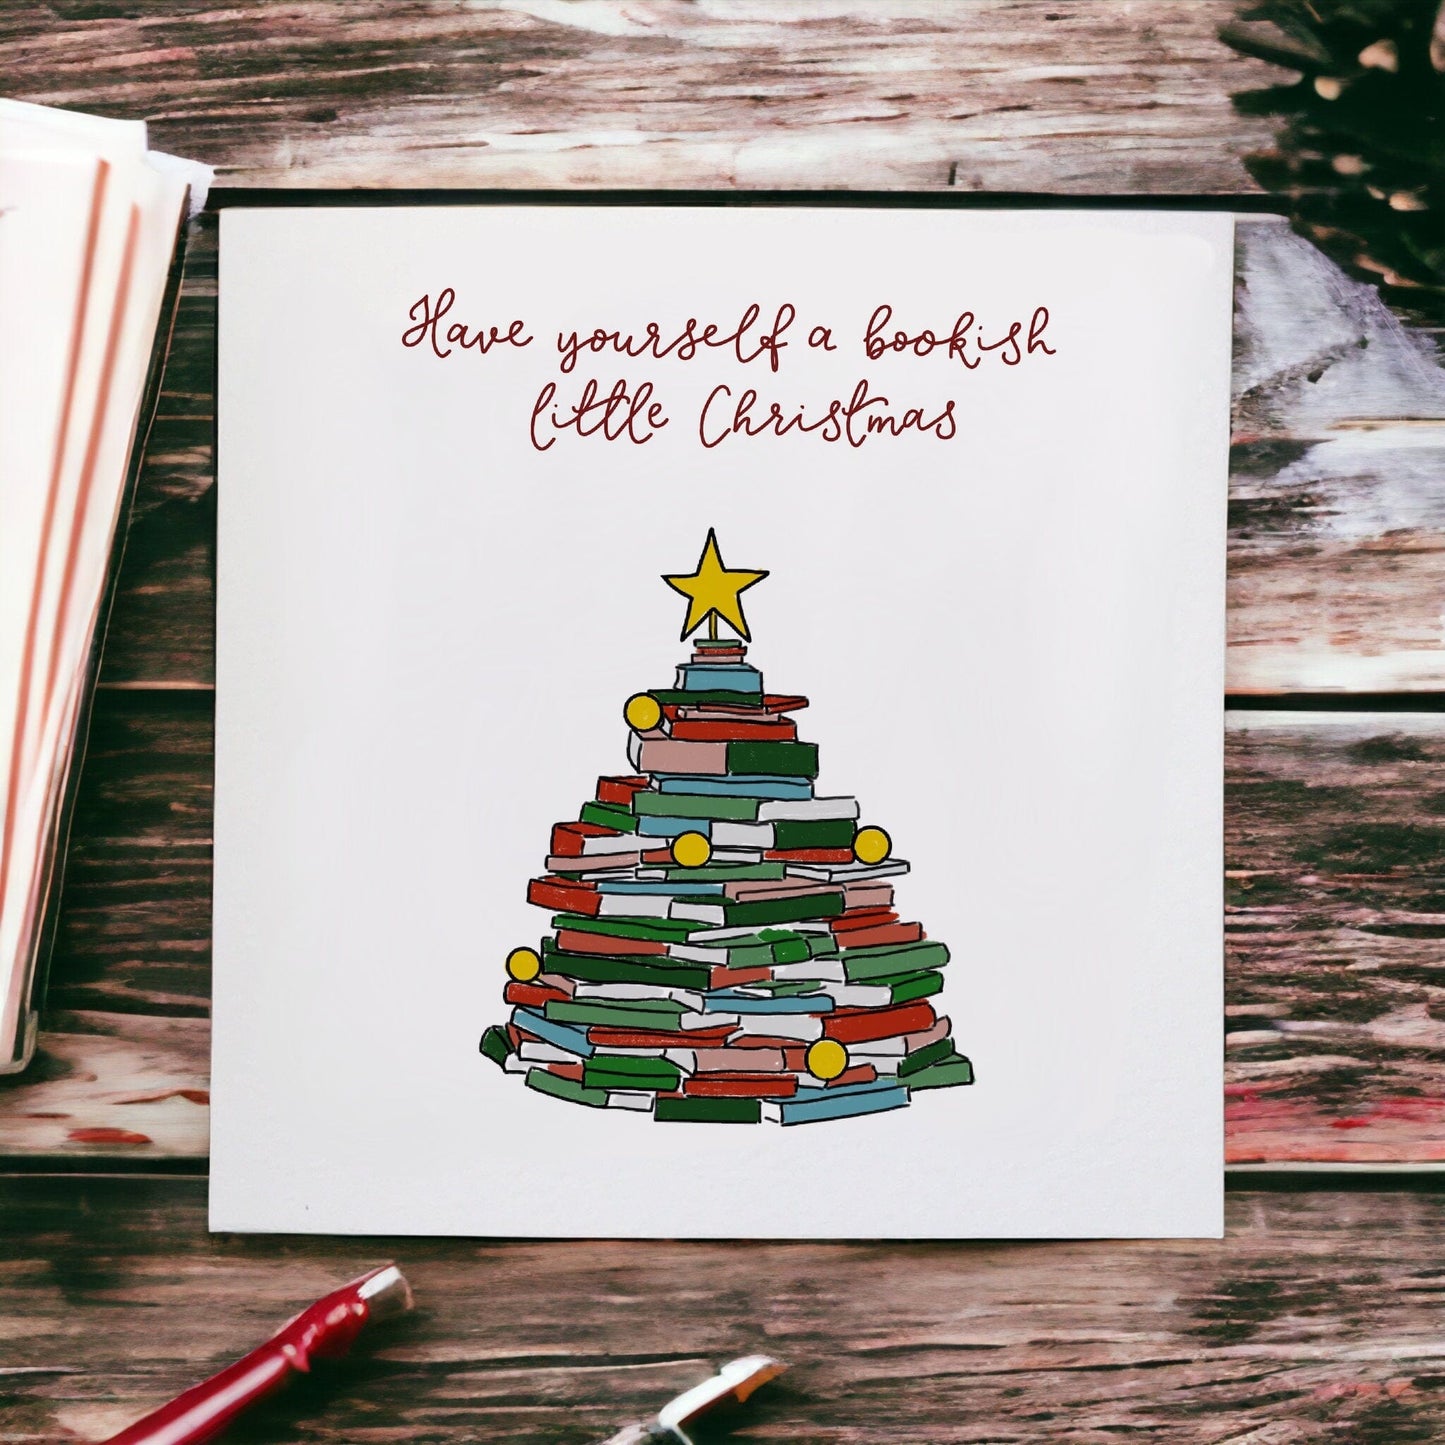 Have yourself a bookish little Christmas card Cards And Hope Designs   